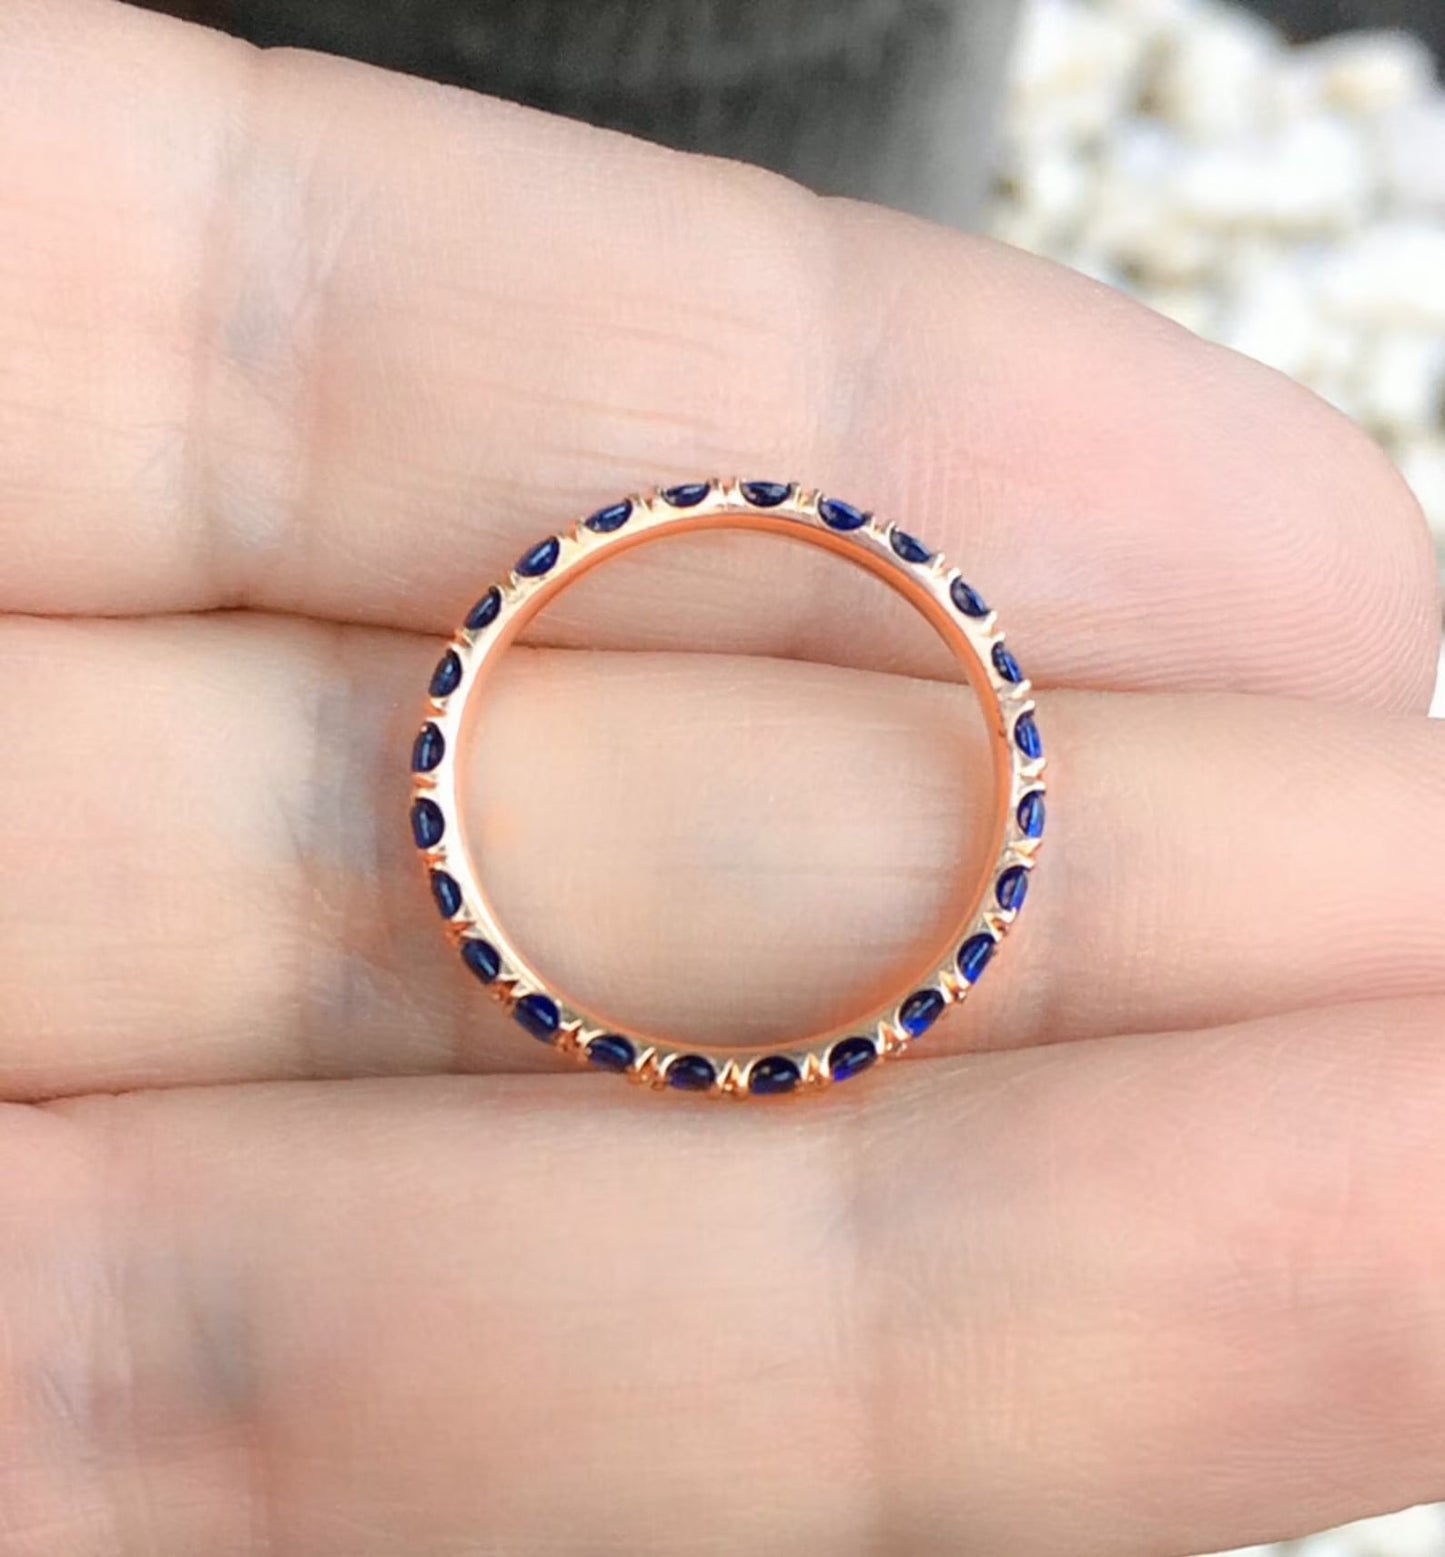 Blue Sapphire Band Full Eternity Pave Blue Sapphire Ring 2.3mm Blue Sapphire Wedding Guard Band Pave Blue Sapphire September Stacking Ring